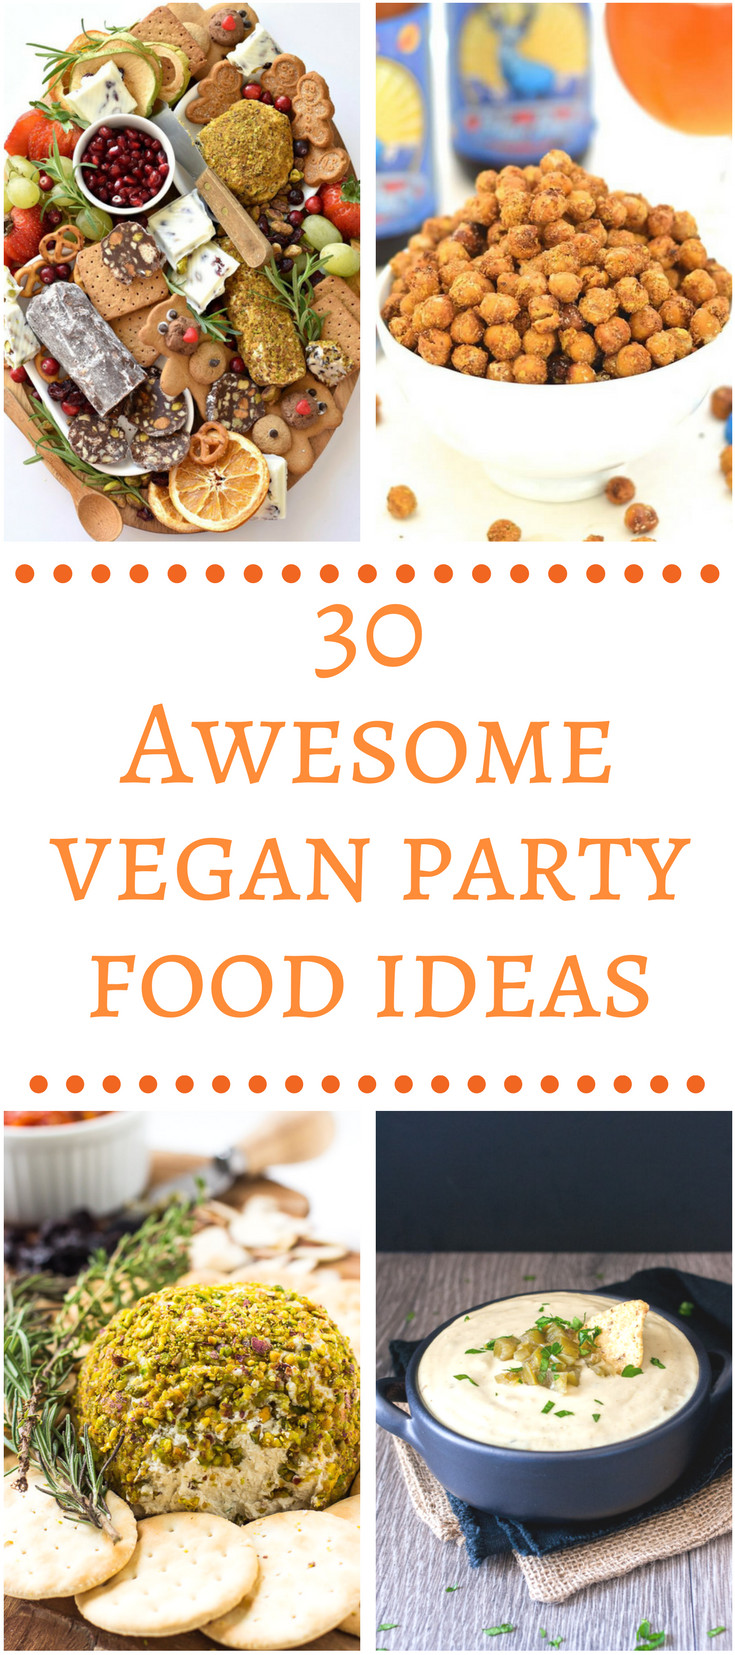 Vegetarian Birthday Party Food Ideas
 30 Awesome Vegan Party Food Ideas